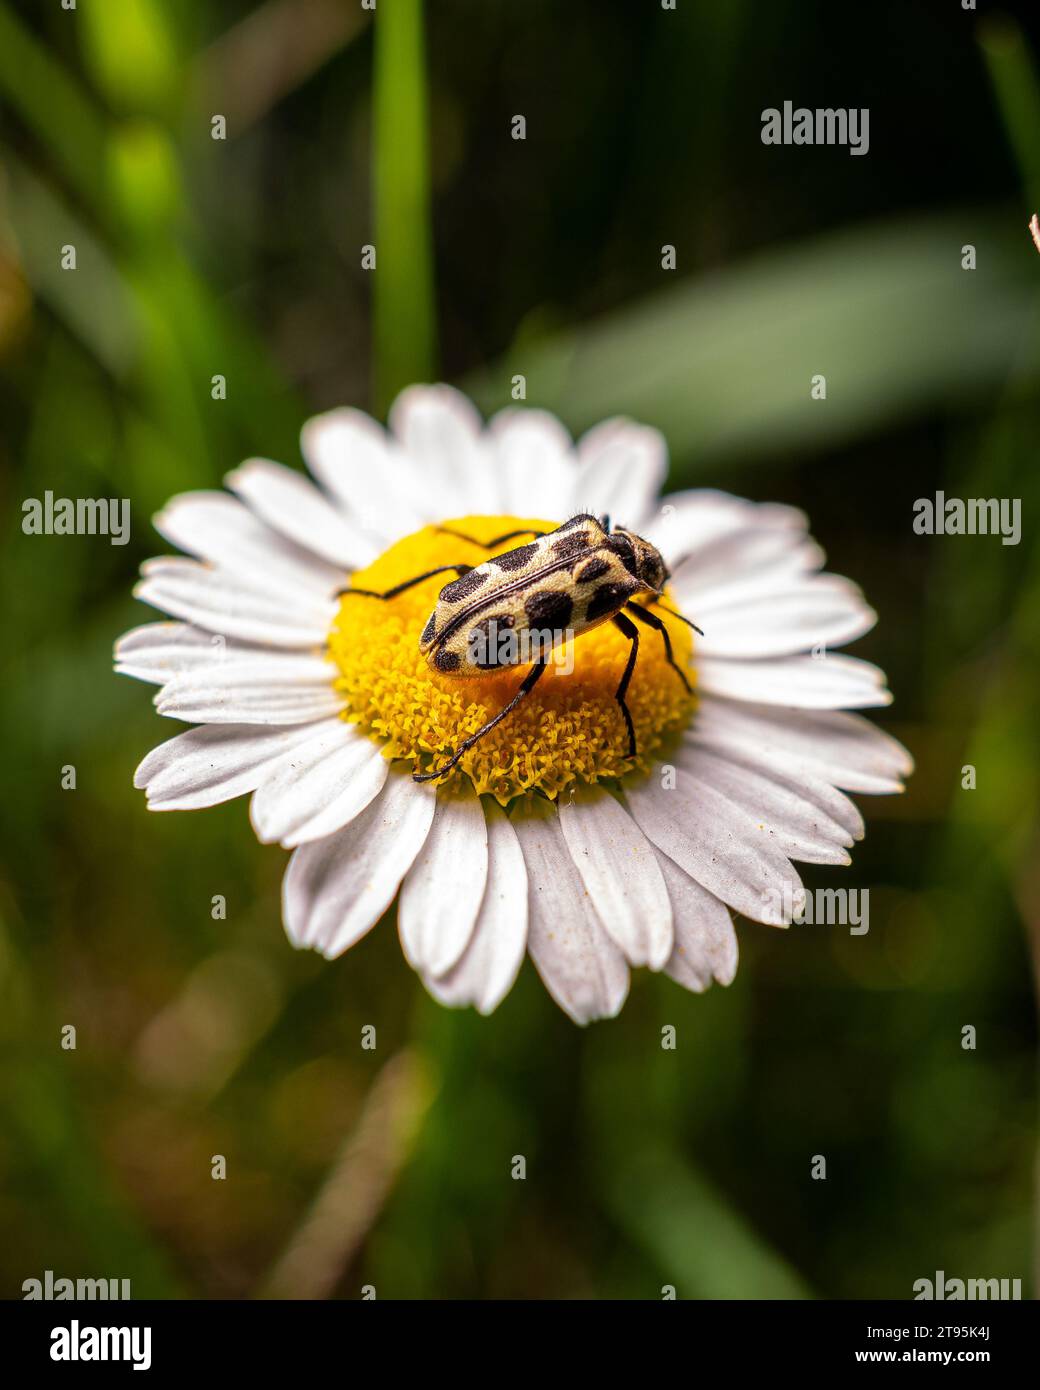 lady beetle on a small white flower Stock Photo